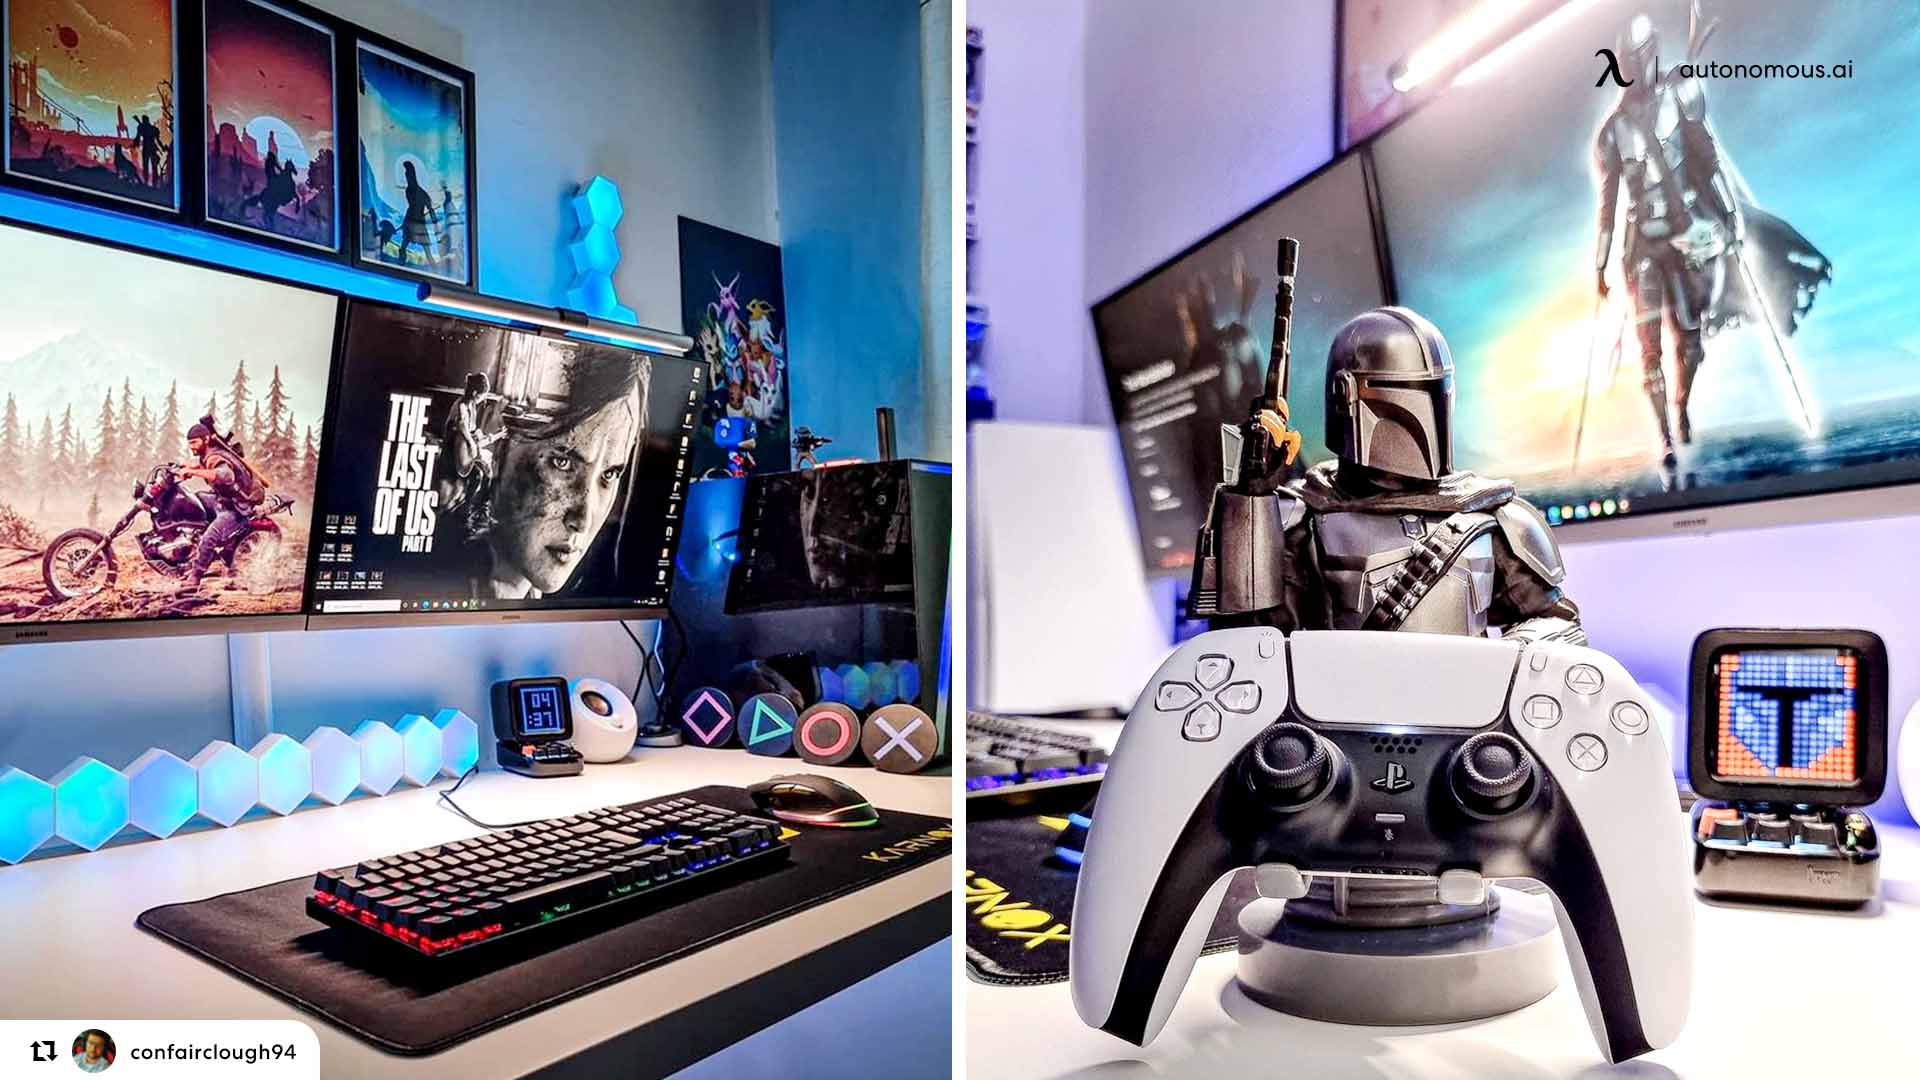 https://cdn.autonomous.ai/static/upload/images/new_post/must-have-desk-accessories-for-gamers-1516-1617350488215.jpg